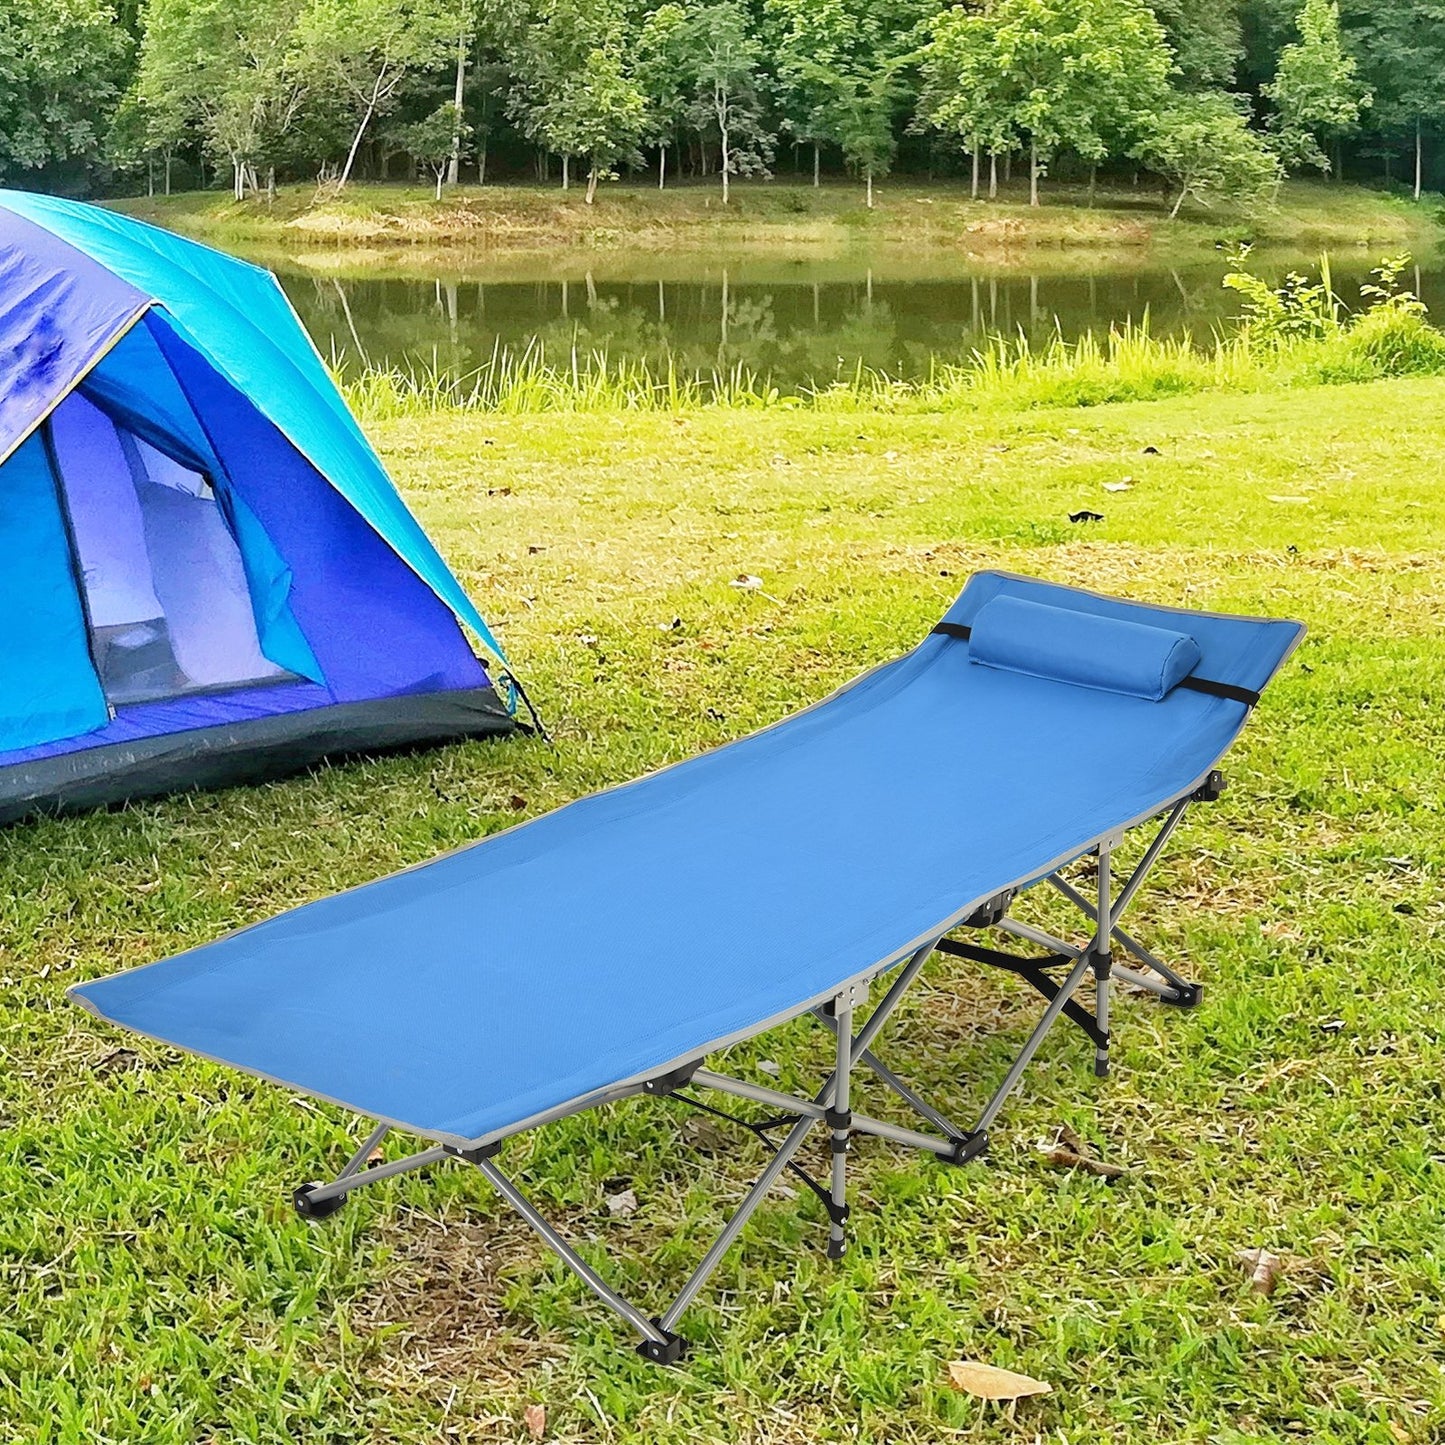 Folding Camping Cot with Side Storage Pocket Detachable Headrest, Blue at Gallery Canada